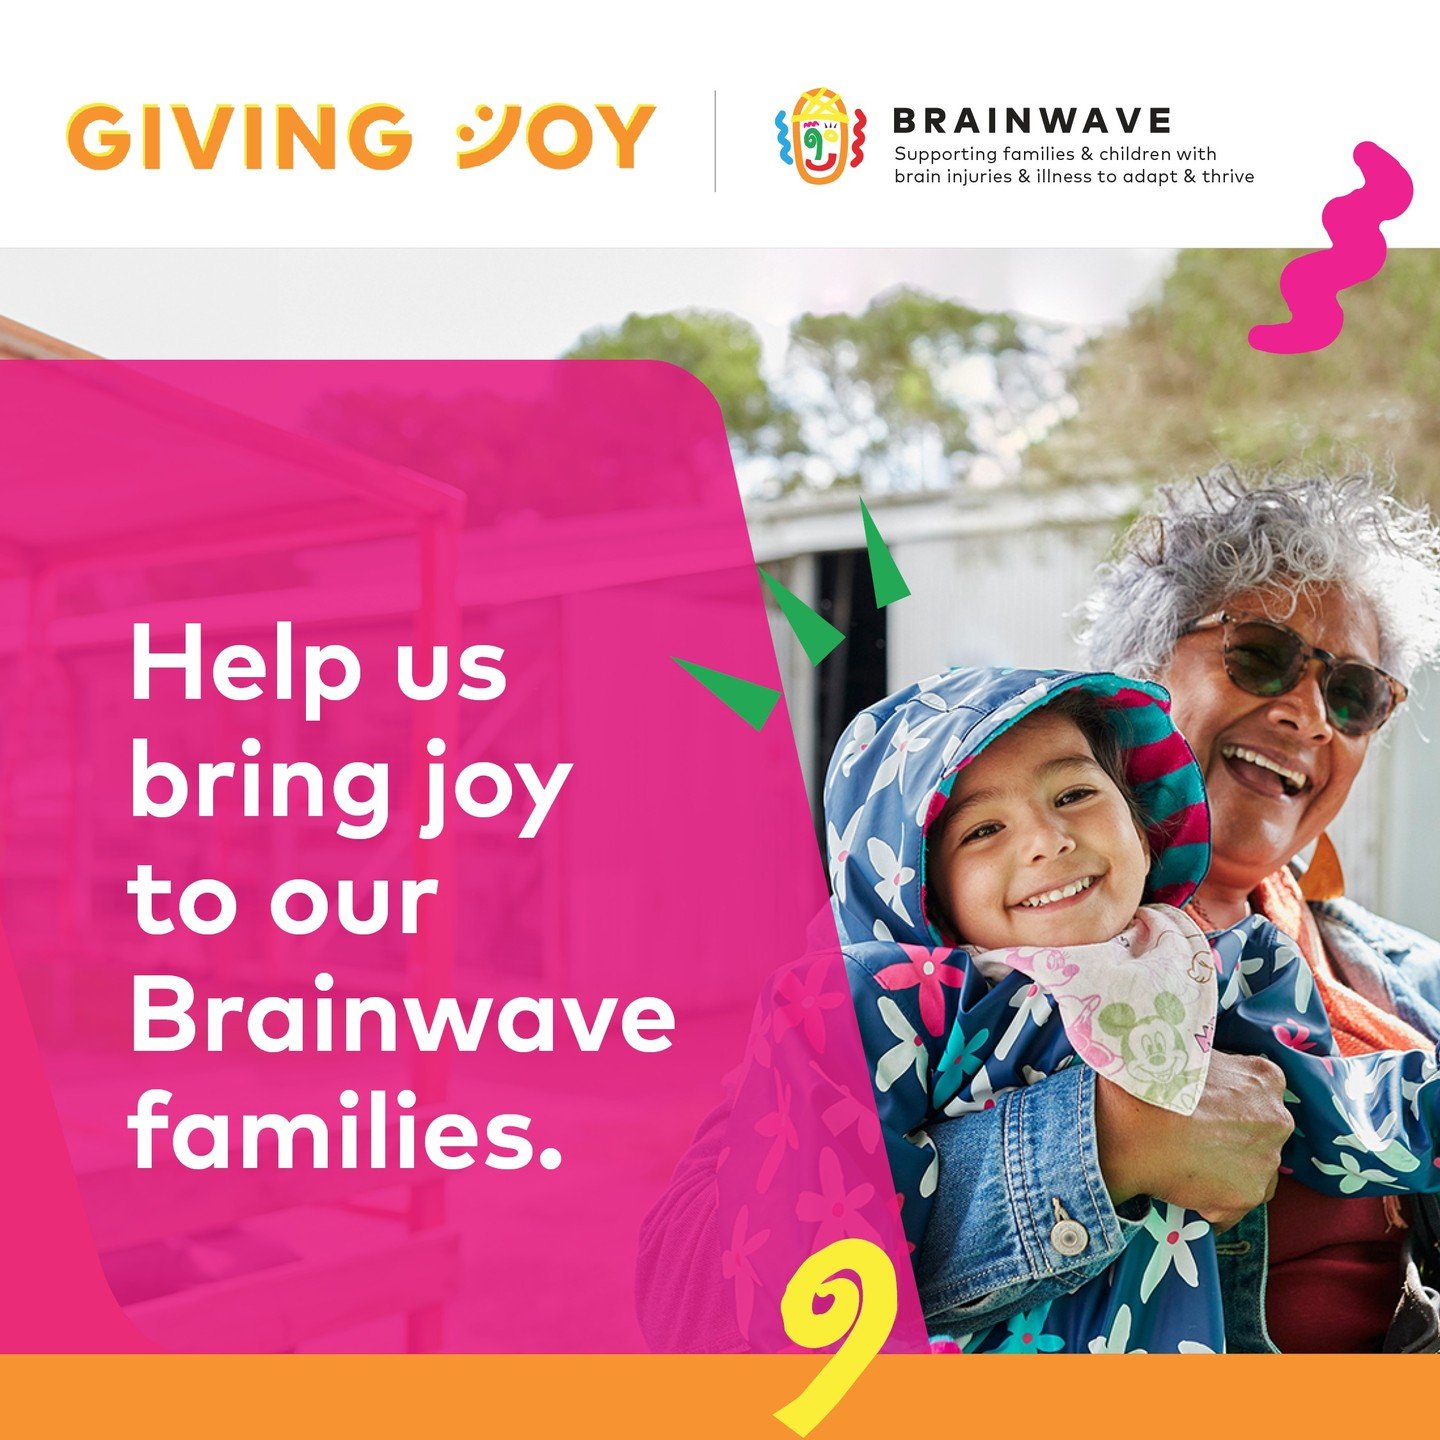 We need your help. 

Every day in Australia, 10 children receive a life-altering diagnosis. 10 children are diagnosed with a brain injury or illness. This is not just a statistic, but a reality for families across Australia. Help us bring joy to thes